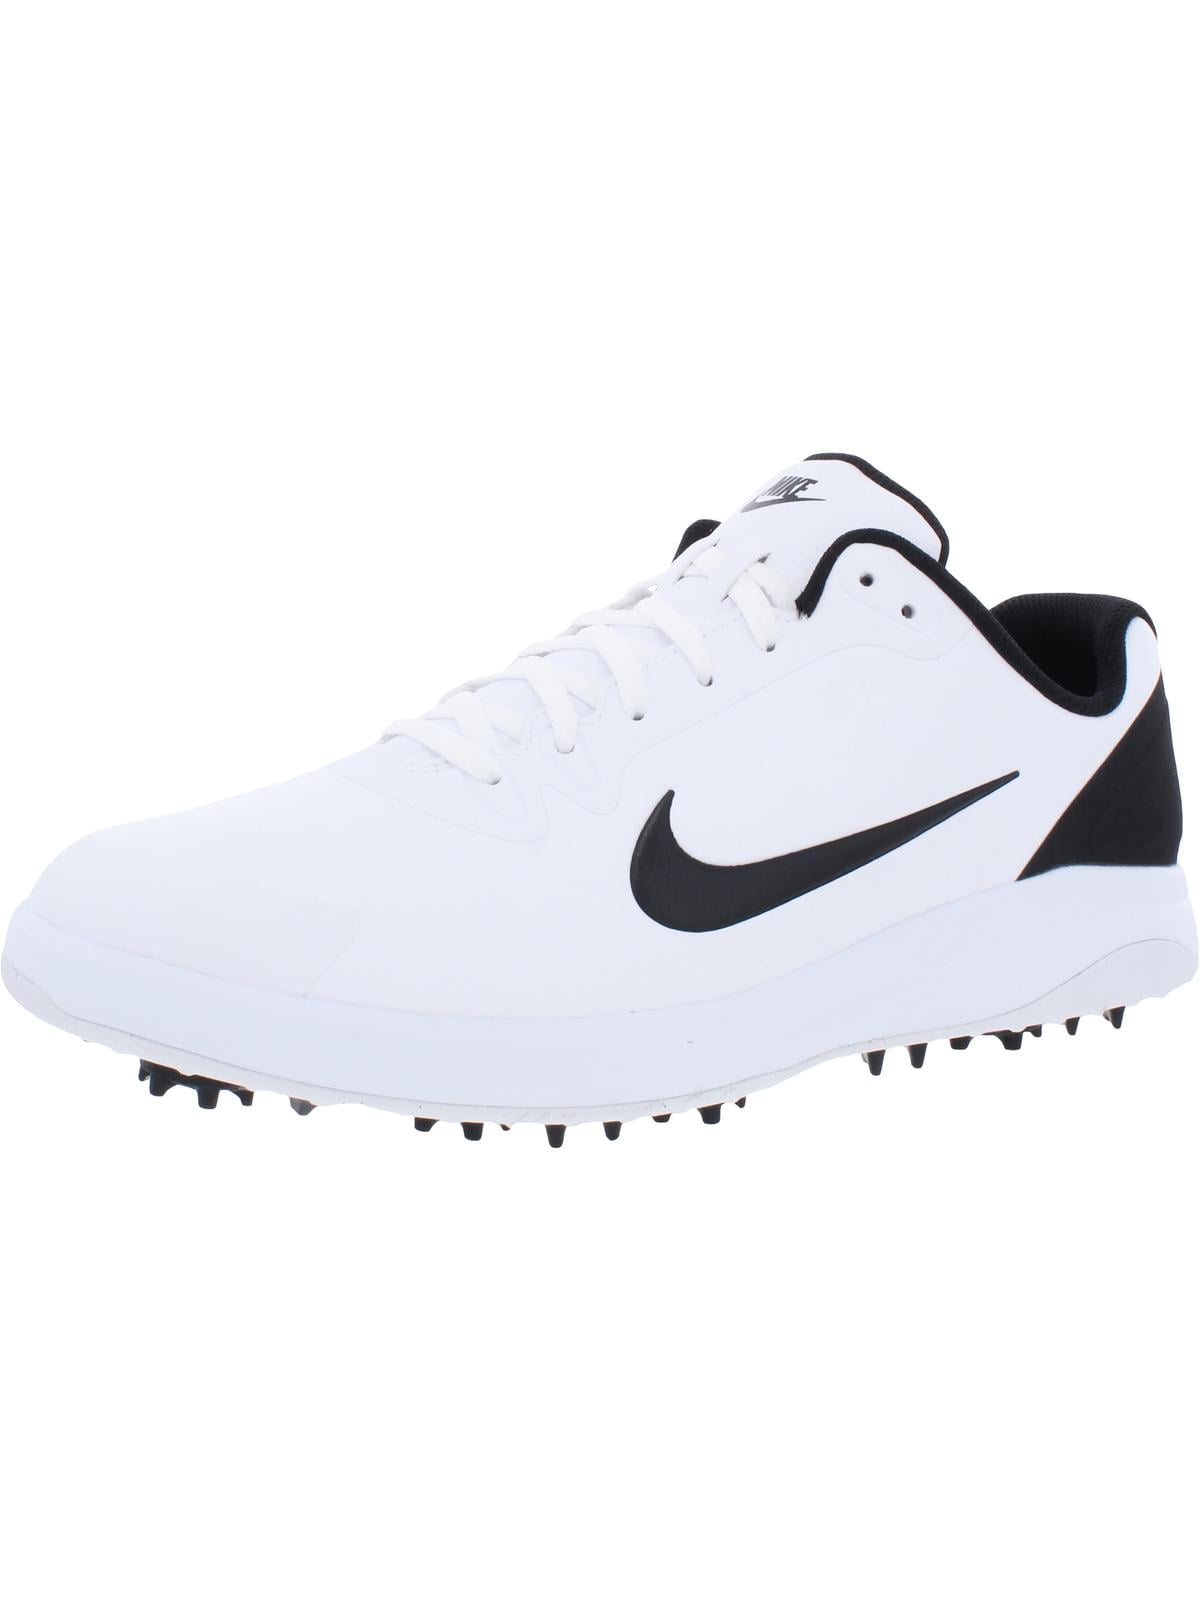 Nike Infinity G Men's Waterproof Spiked Golf Shoes Black-White Size 10.5W